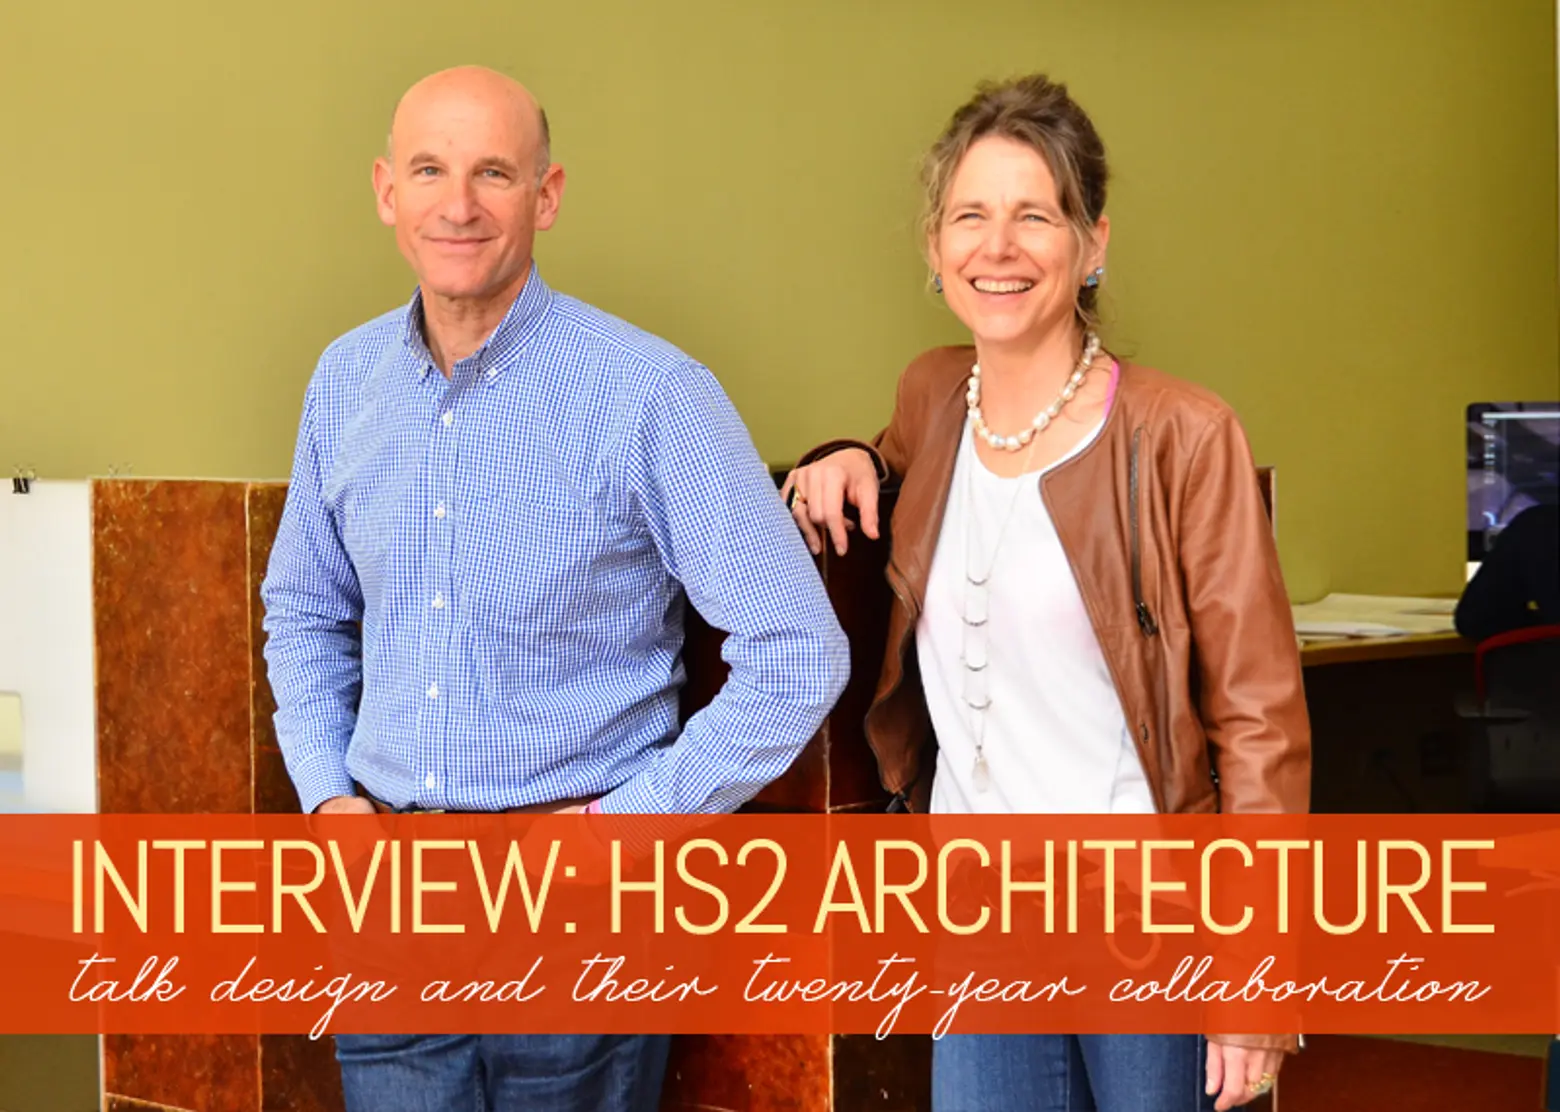 INTERVIEW: HS2 Architecture’s Tom and Jane Talk Residential Design and Their 20-Year Collaboration